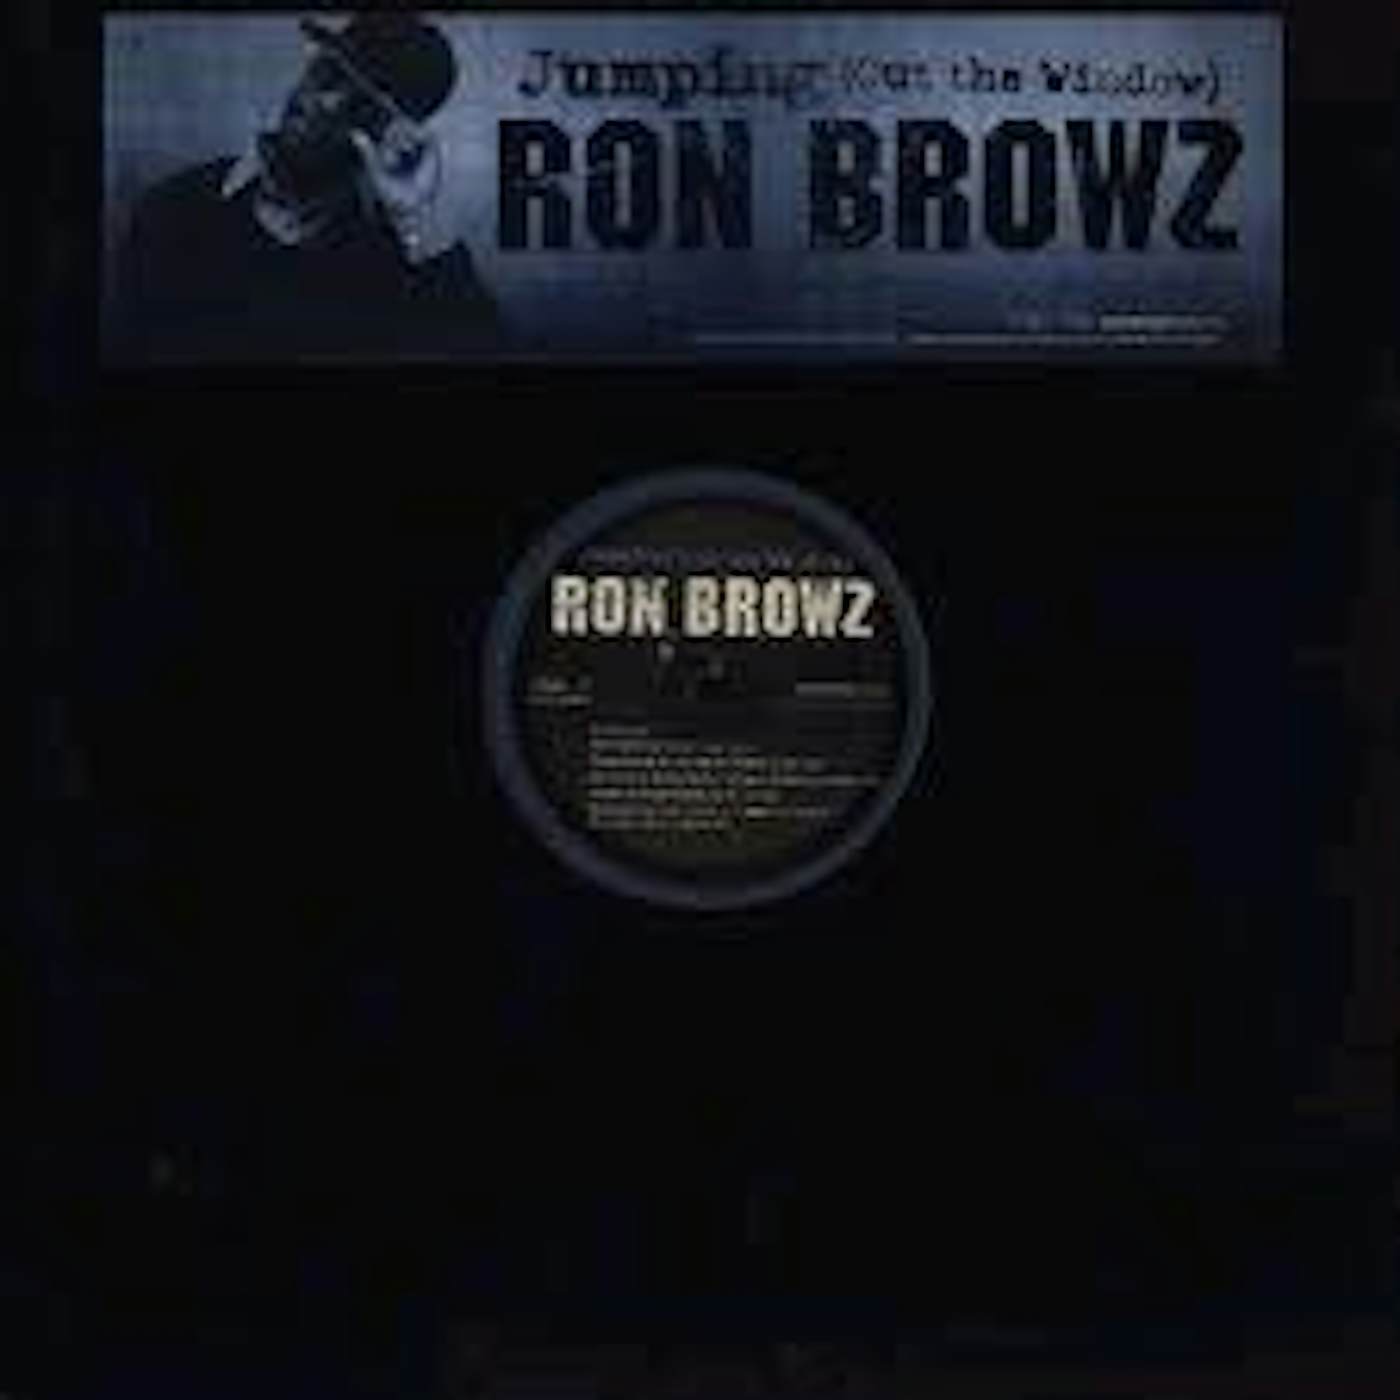 Ron Browz JUMPING OUT THE WINDOW (X3) (Vinyl)